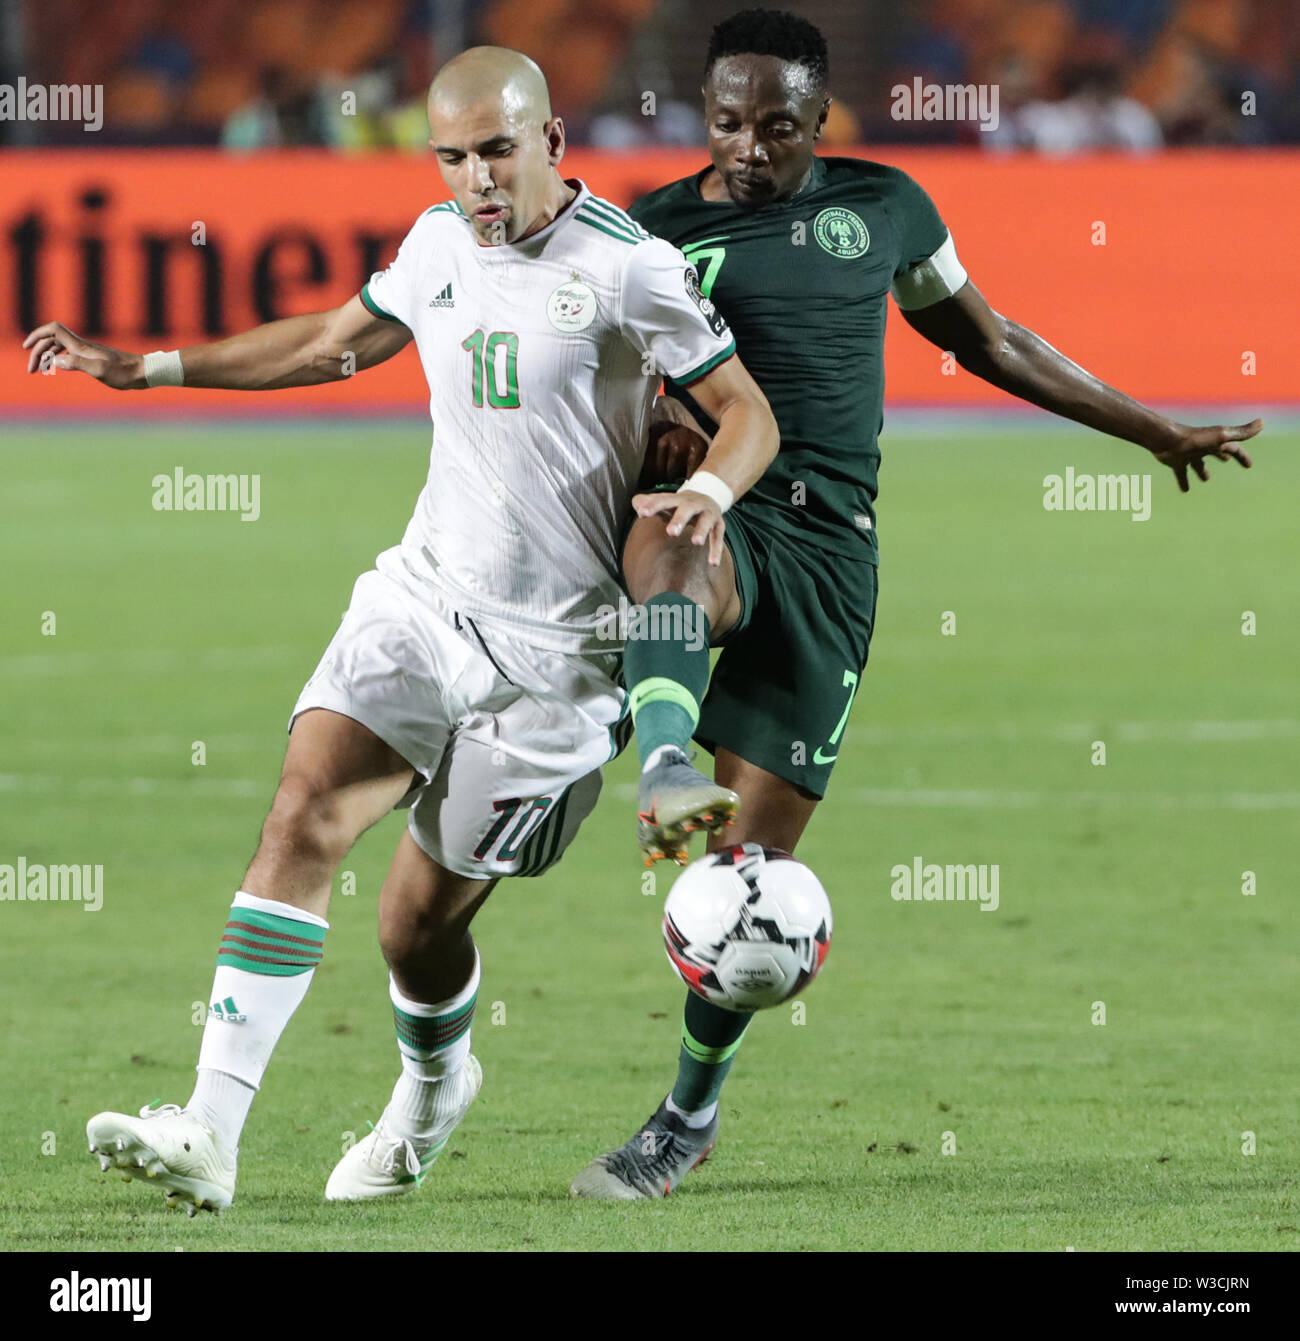 Cairo, Egypt. 14th July, 2019. Algeria's Sofiane Feghouli (L) and Nigeria's Ahmed Musa during the 2019 Africa Cup of Nations semi-final soccer match between Algeria and Nigeria at the Cairo International Stadium. Credit: Oliver Weiken/dpa/Alamy Live News Stock Photo